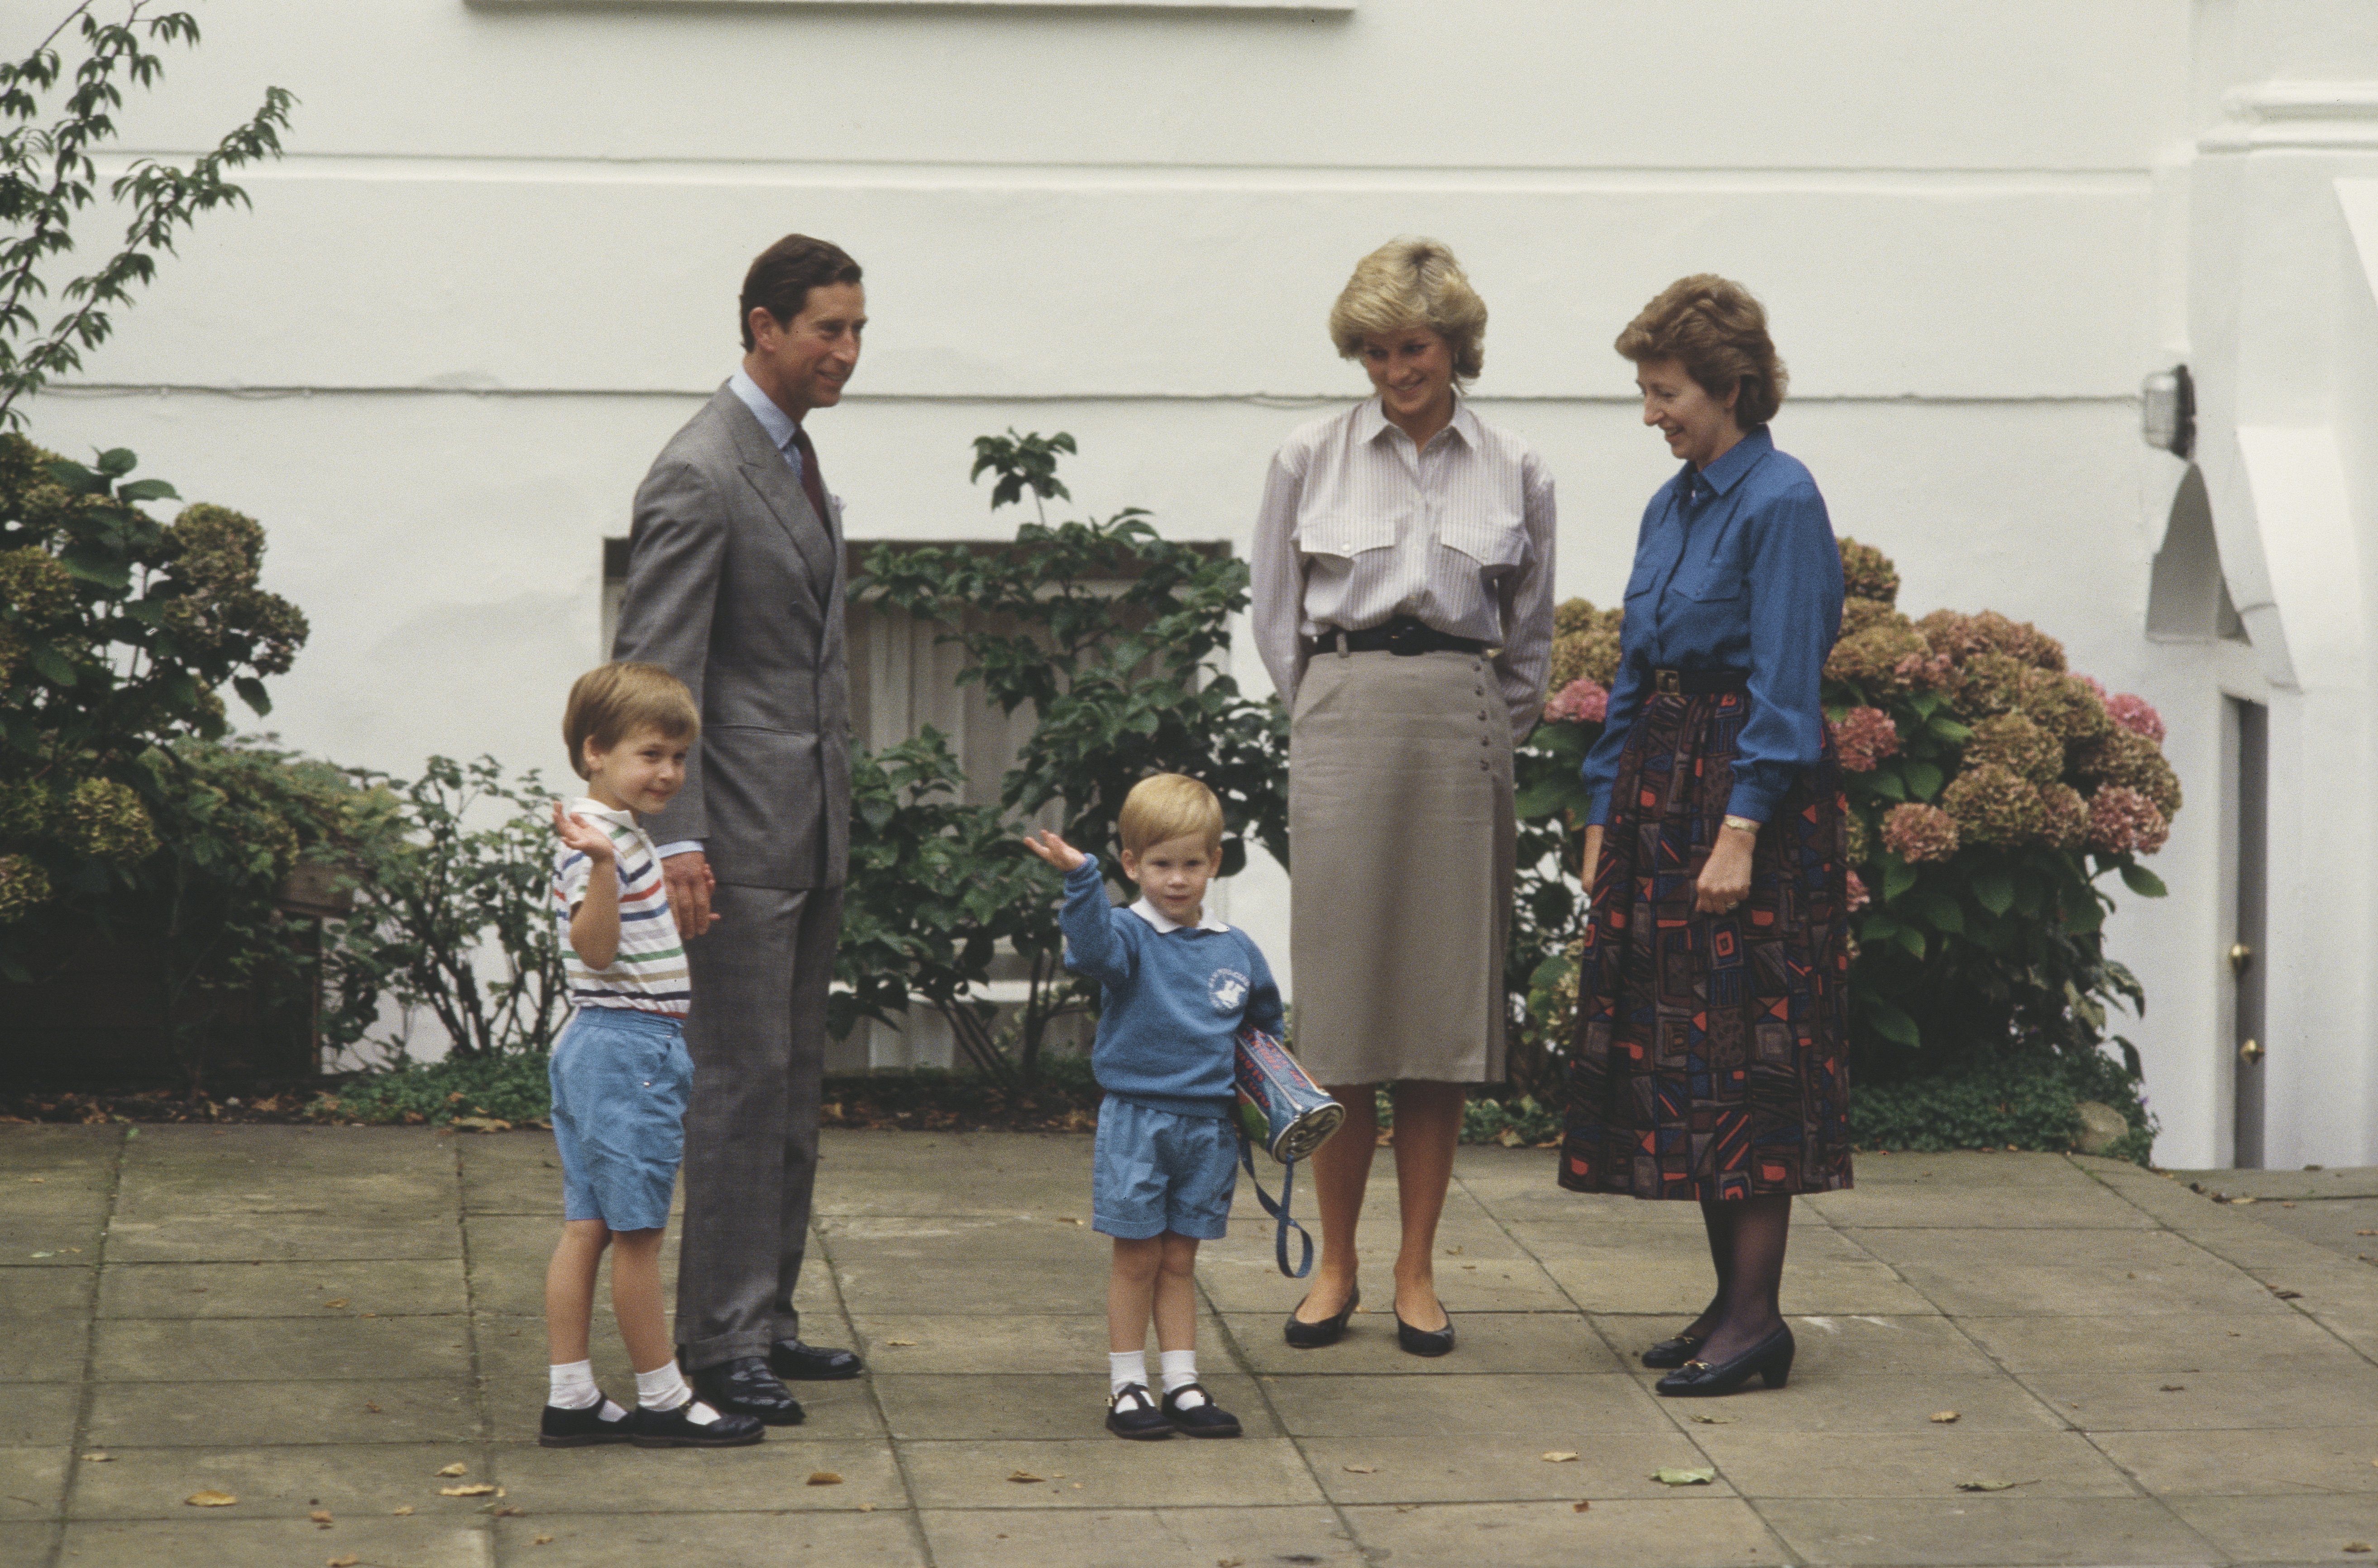 Prince Charles, Princess Diana, and Prince William attending Prince Harry's first day at Mrs Mynors' nursery school in September 1987 in London. / Source: Getty Images